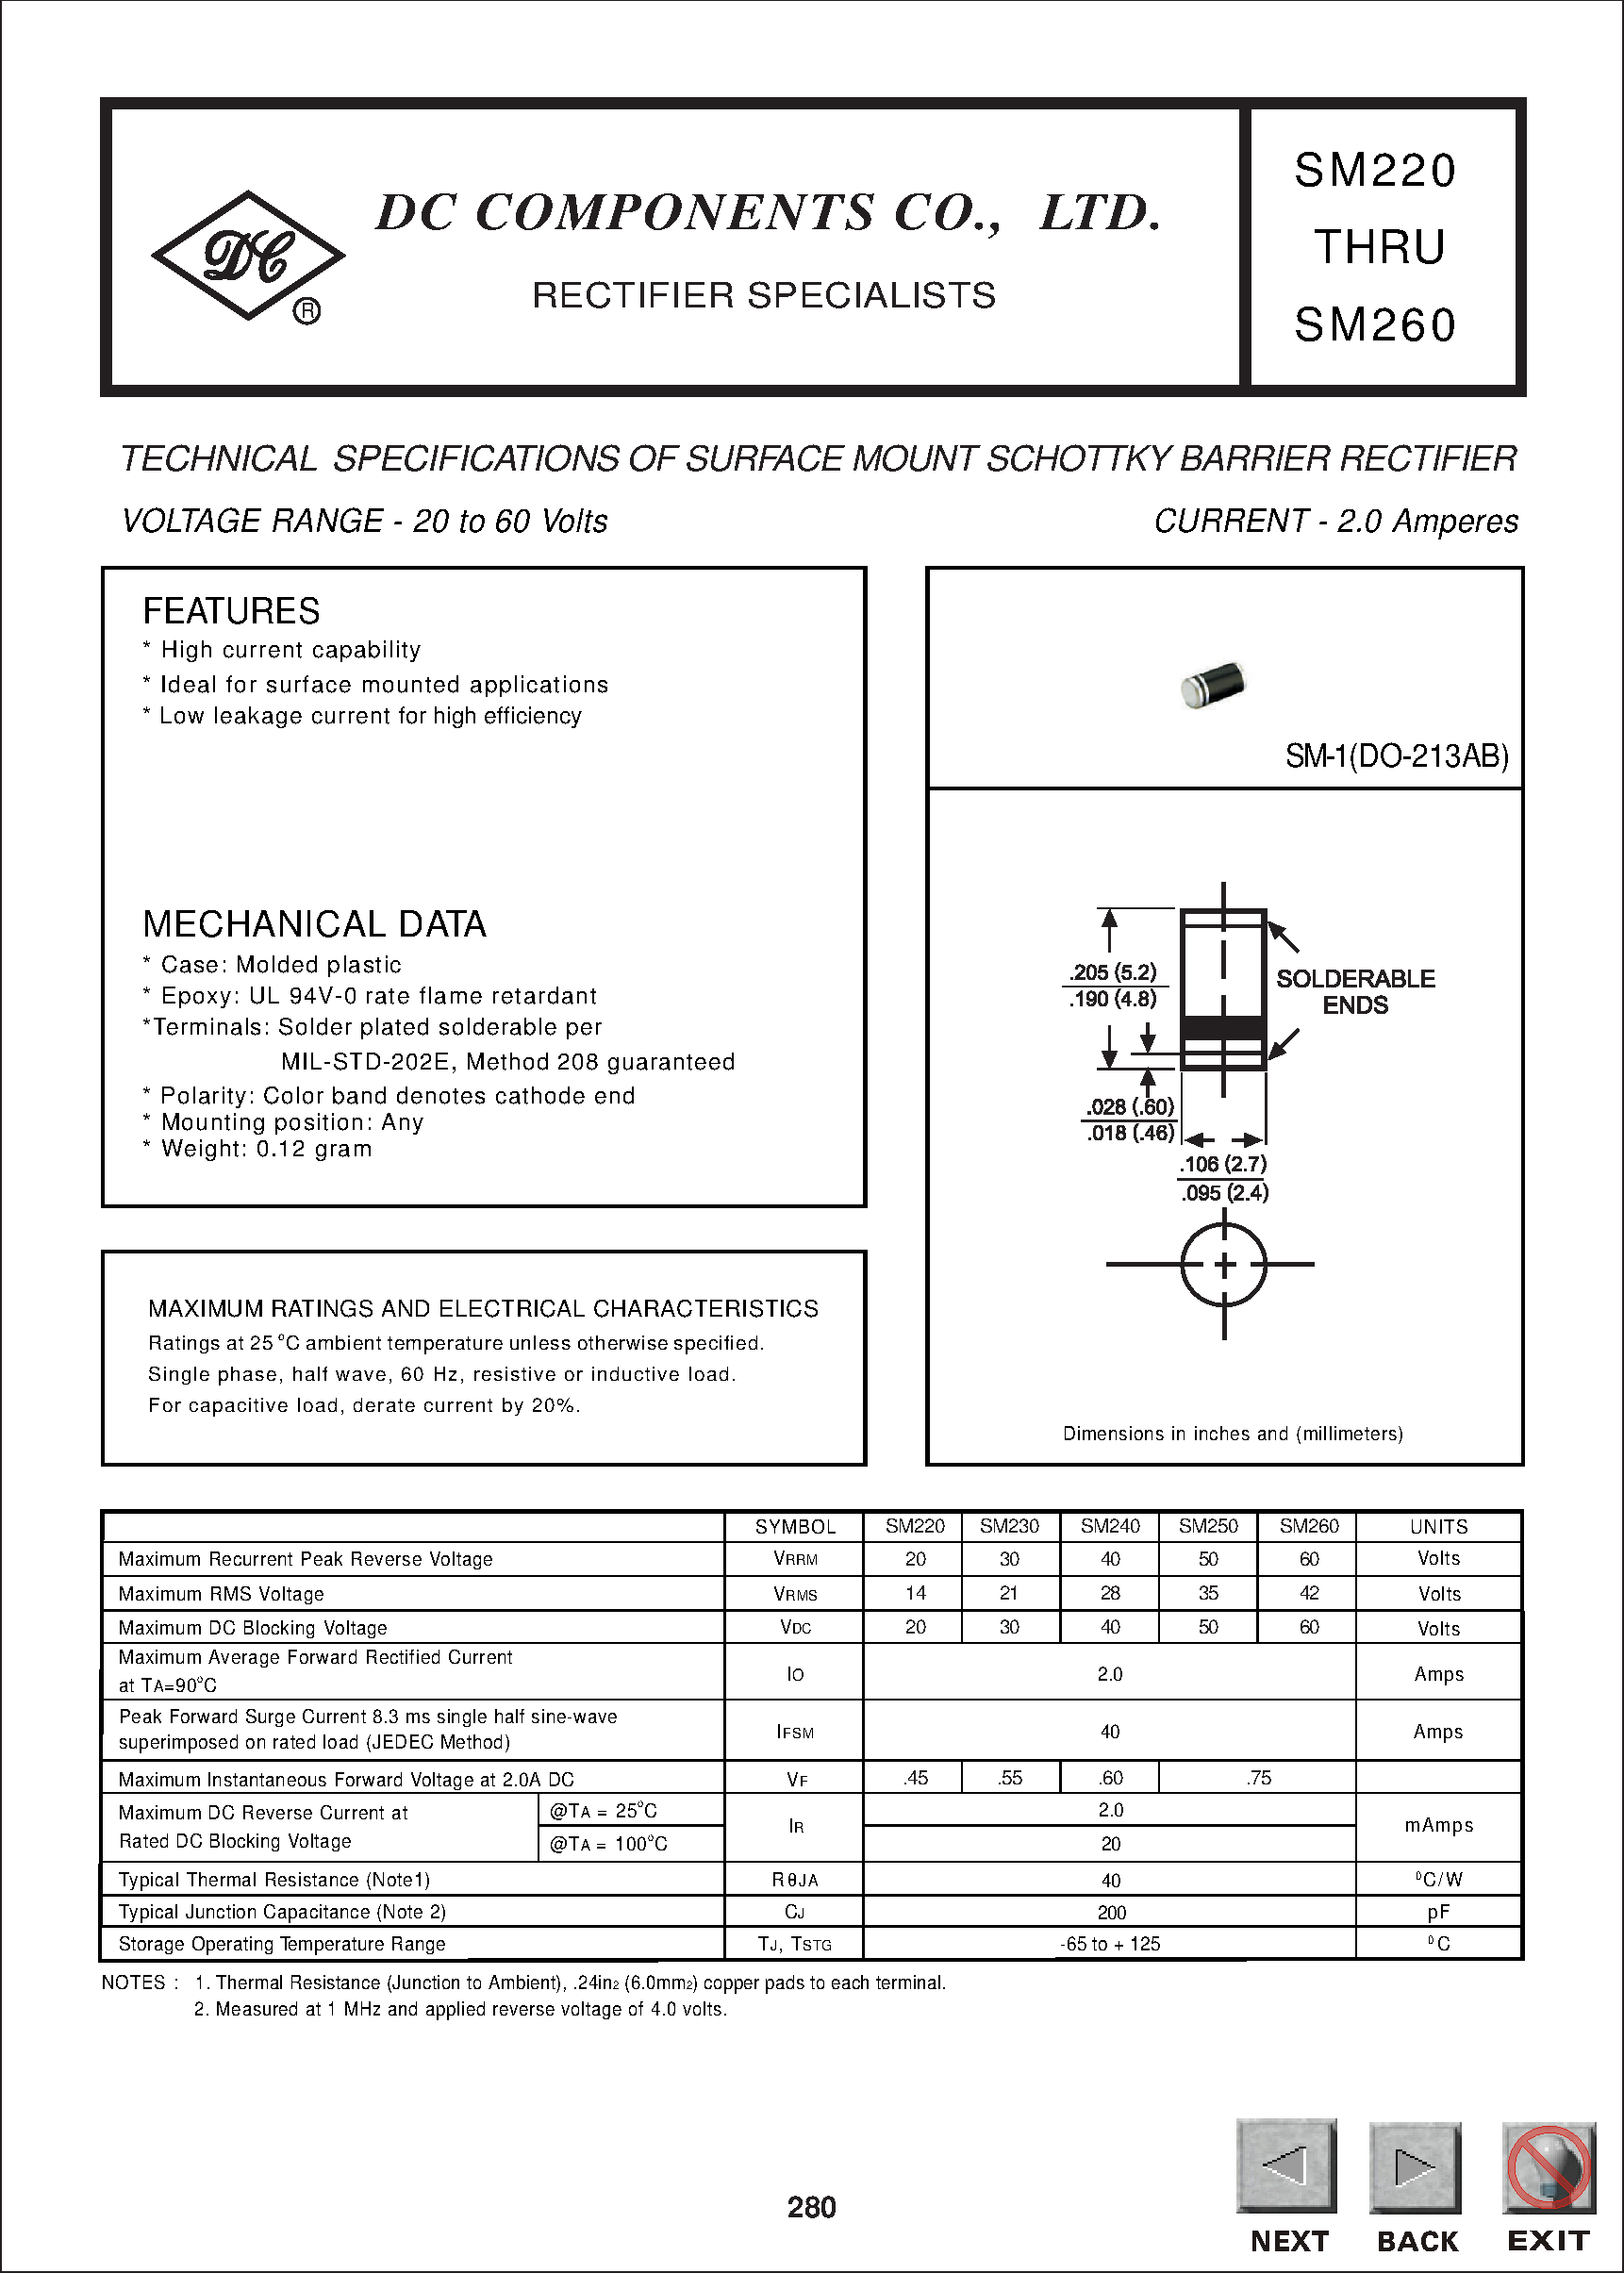 Даташит SM240 - TECHNICAL SPECIFICATIONS OF SURFACE MOUNT SCHOTTKY BARRIER RECTIFIER страница 1